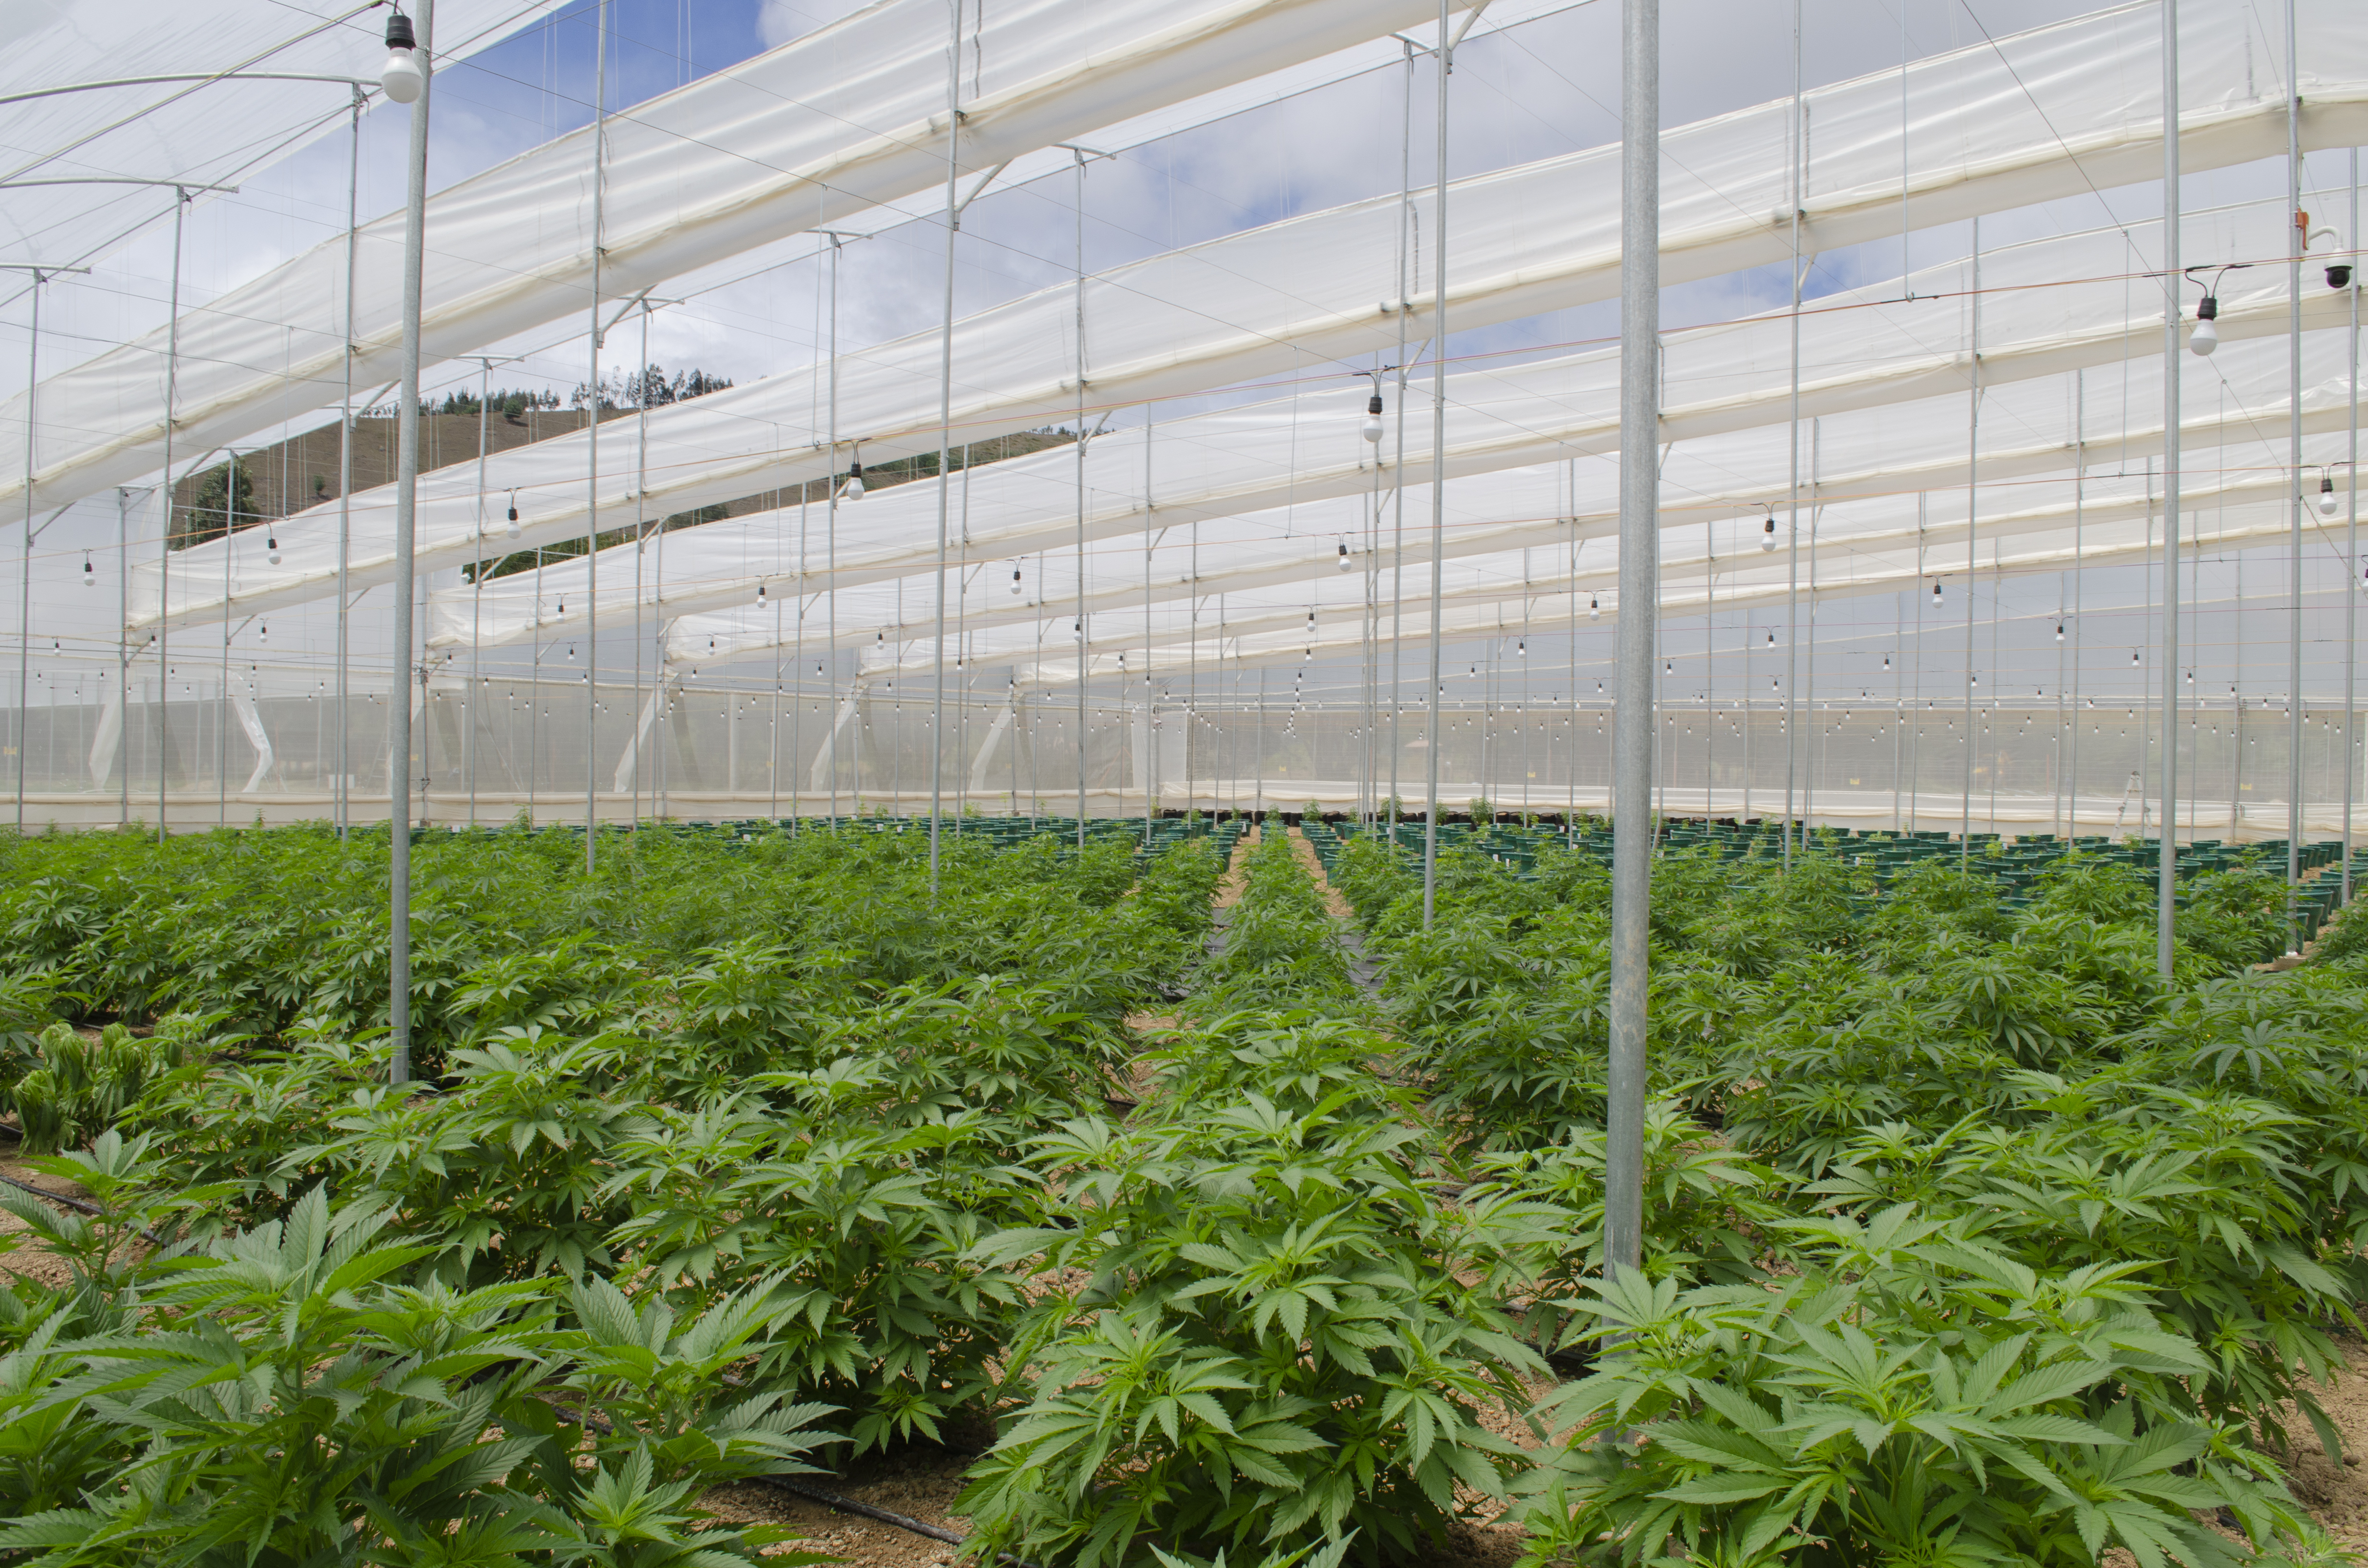 Cultivation of cannabis by the company Clever Leaves, in Colombia